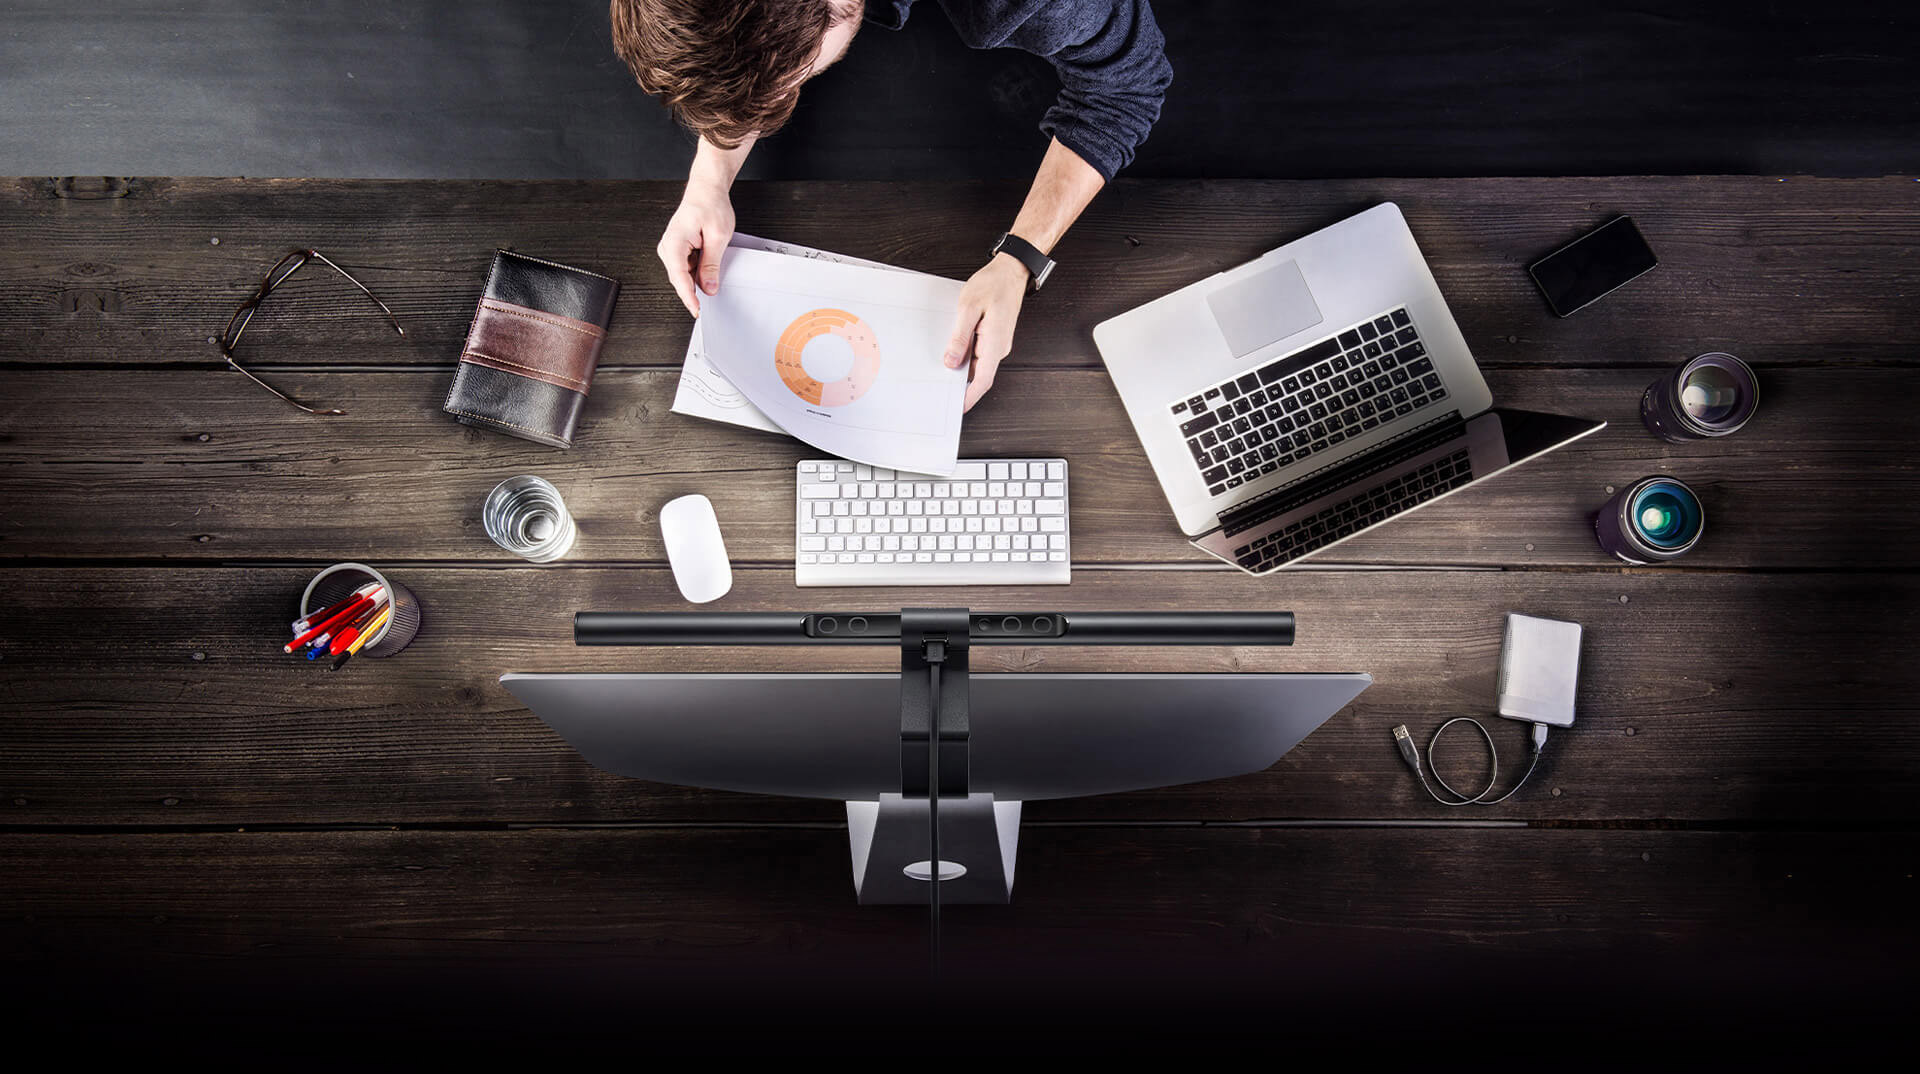 overhead view of the BenQ ScreenBar Plus on top of an imac with a man working on a desk that has a cup of pens, glasses, leather-bound notebook, cup of water, mouse, keyboard, open laptop, smartphone, camera lenses and external hard drive with cable